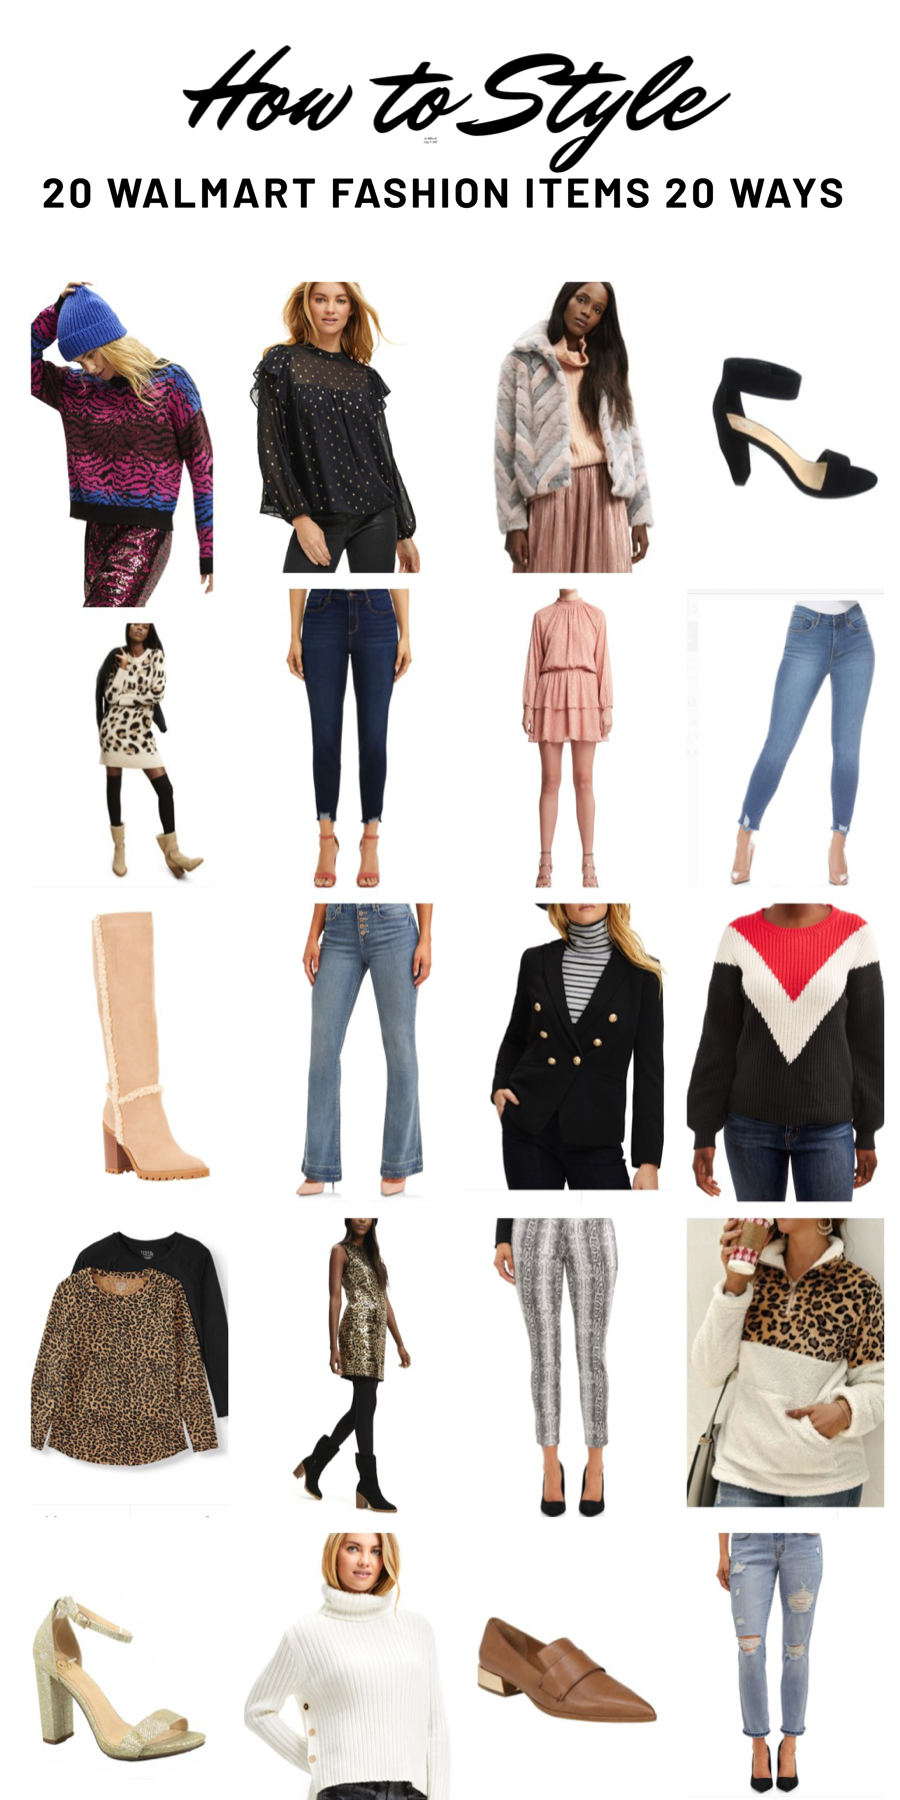 How to Style 20 Walmart Fashion Items 20 Ways CC & Mike